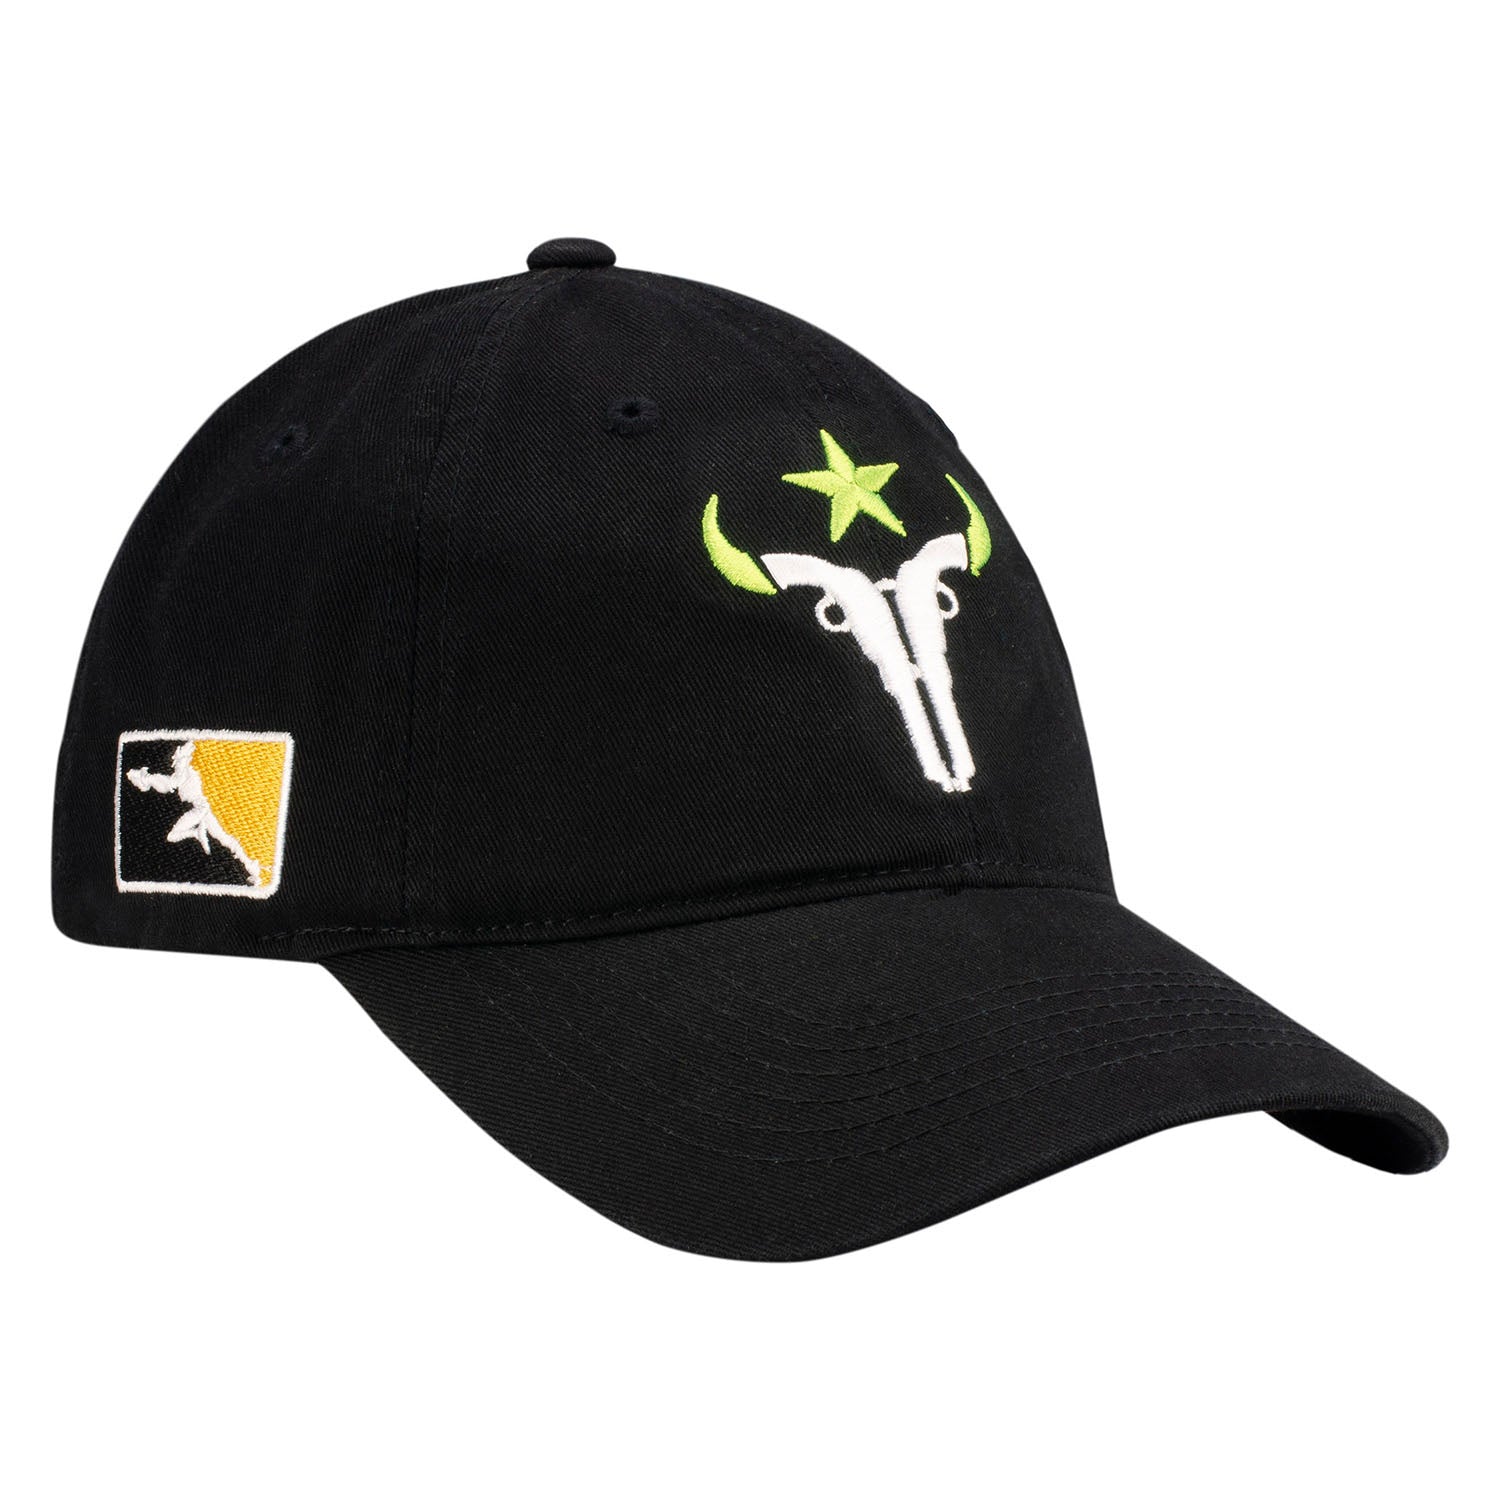 Houston Outlaws Black Dad Hat - Right View